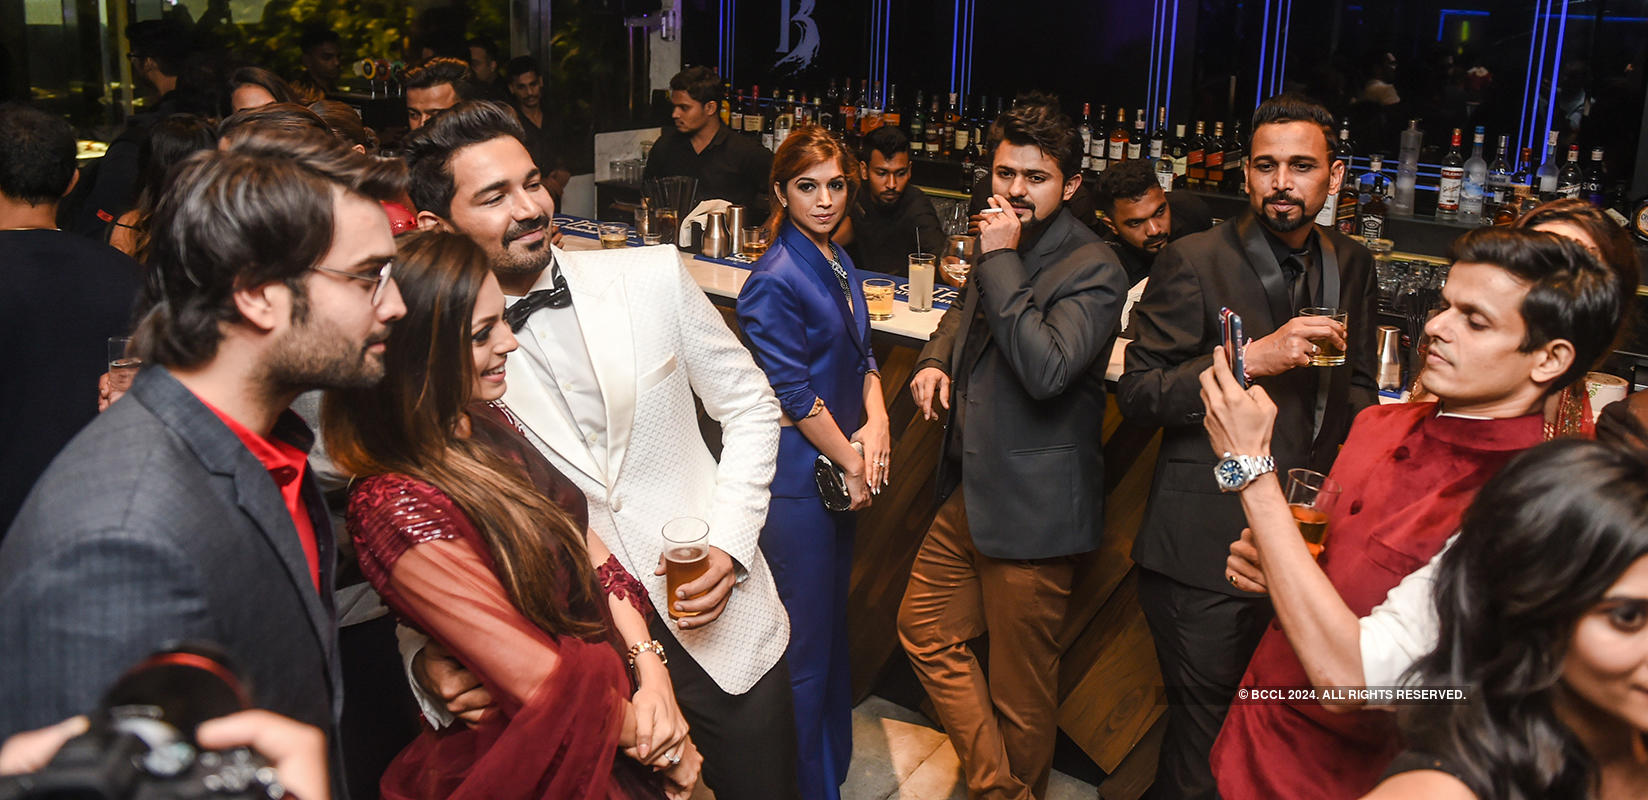 Inside pictures of Rubina Dilaik and Abhinav Shukla’s starry wedding reception you can’t give a miss!